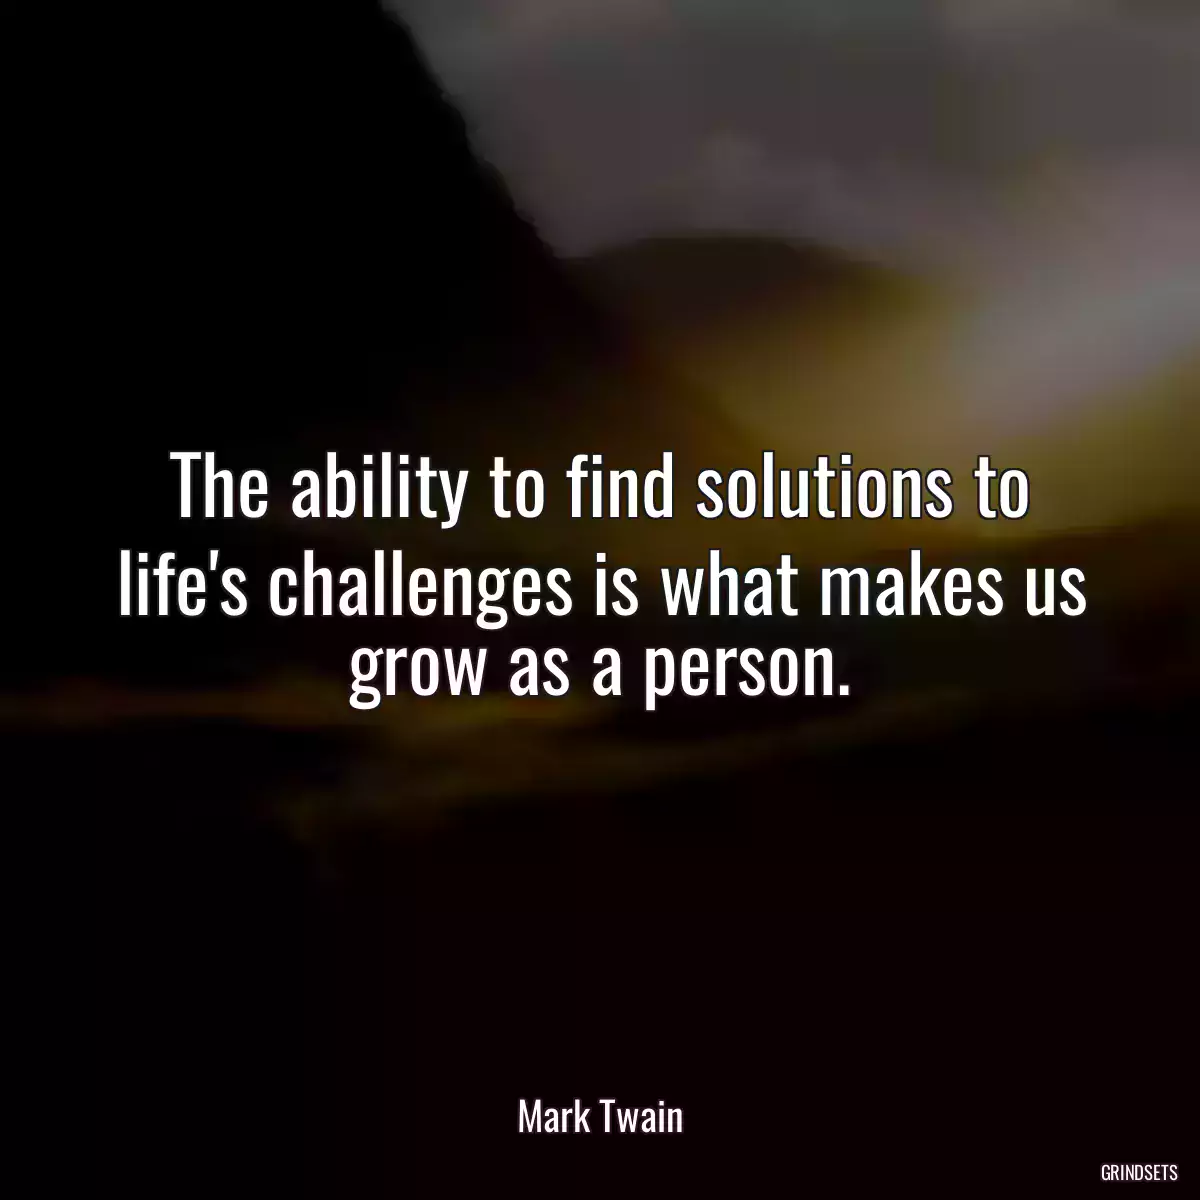 The ability to find solutions to life\'s challenges is what makes us grow as a person.